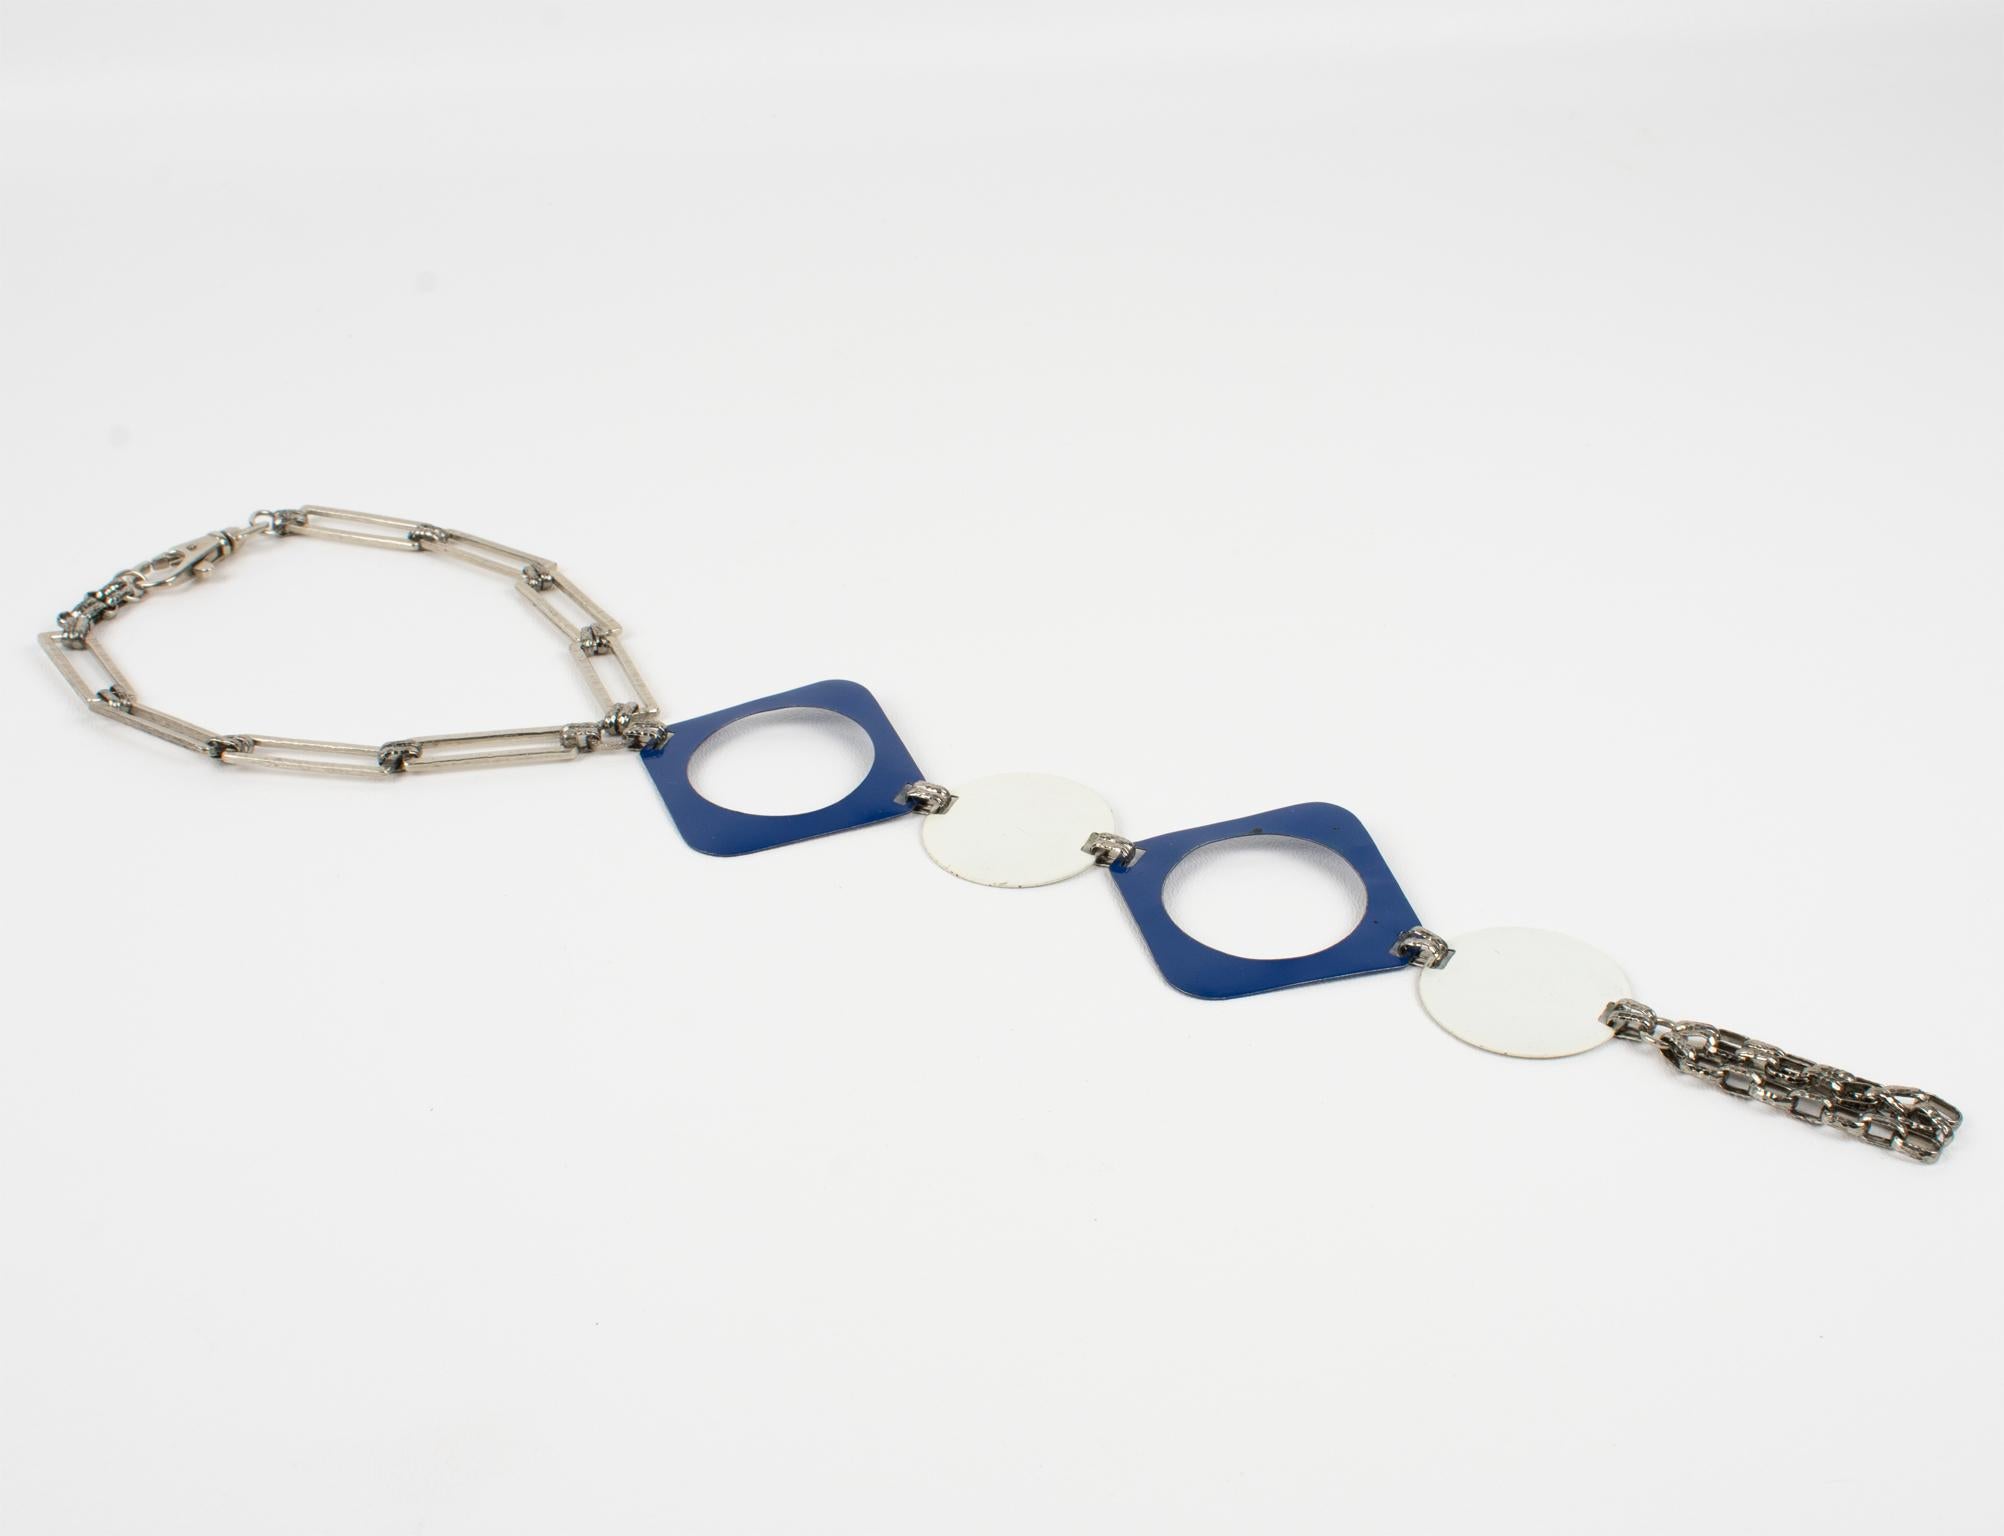 Paco Rabanne Style Space Age Collar Necklace with Blue and White Enamel, 1960s For Sale 1